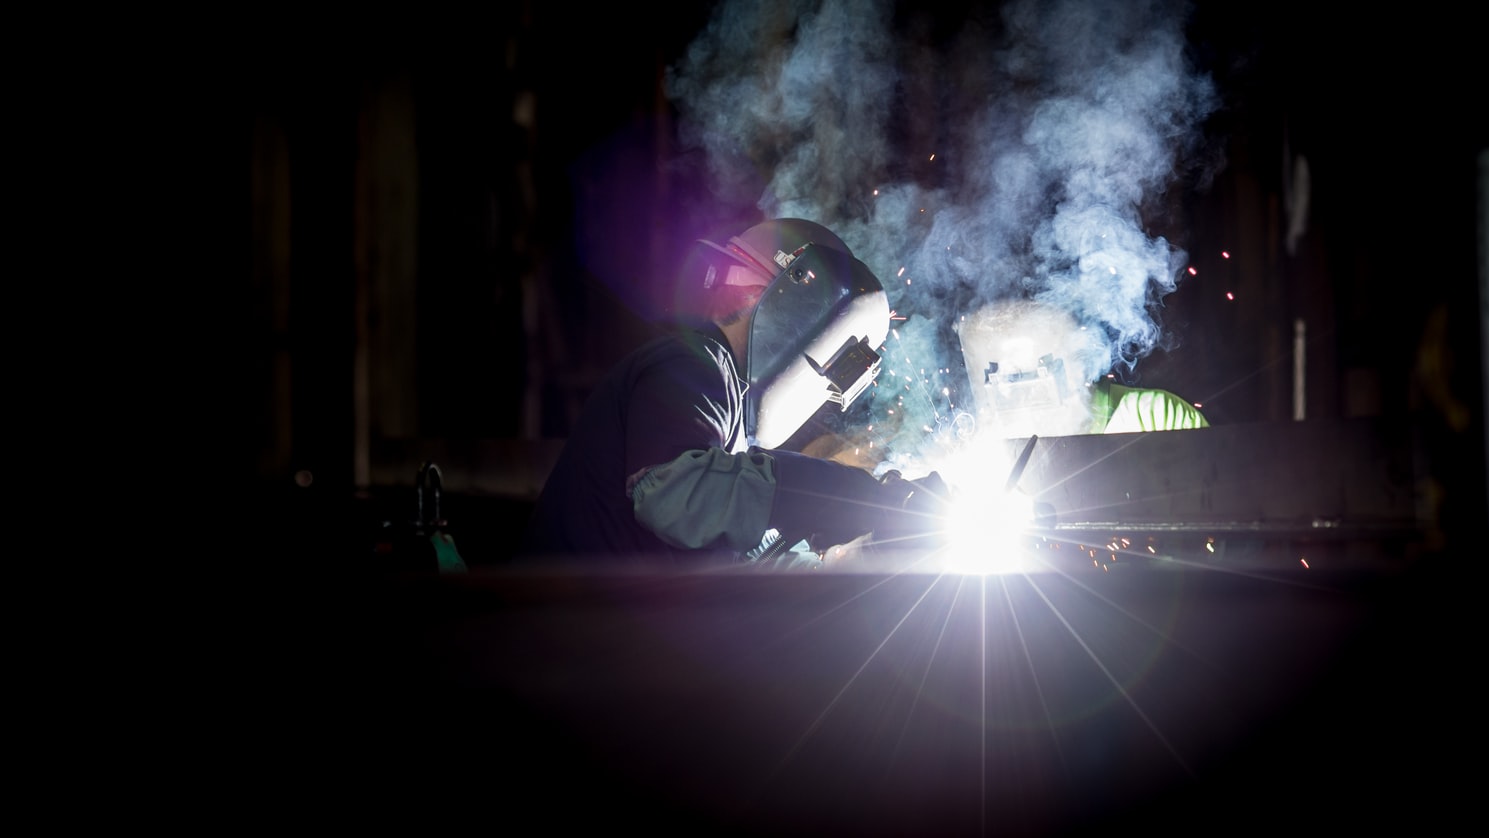 A Welding Workforce Labor Crisis is Looming